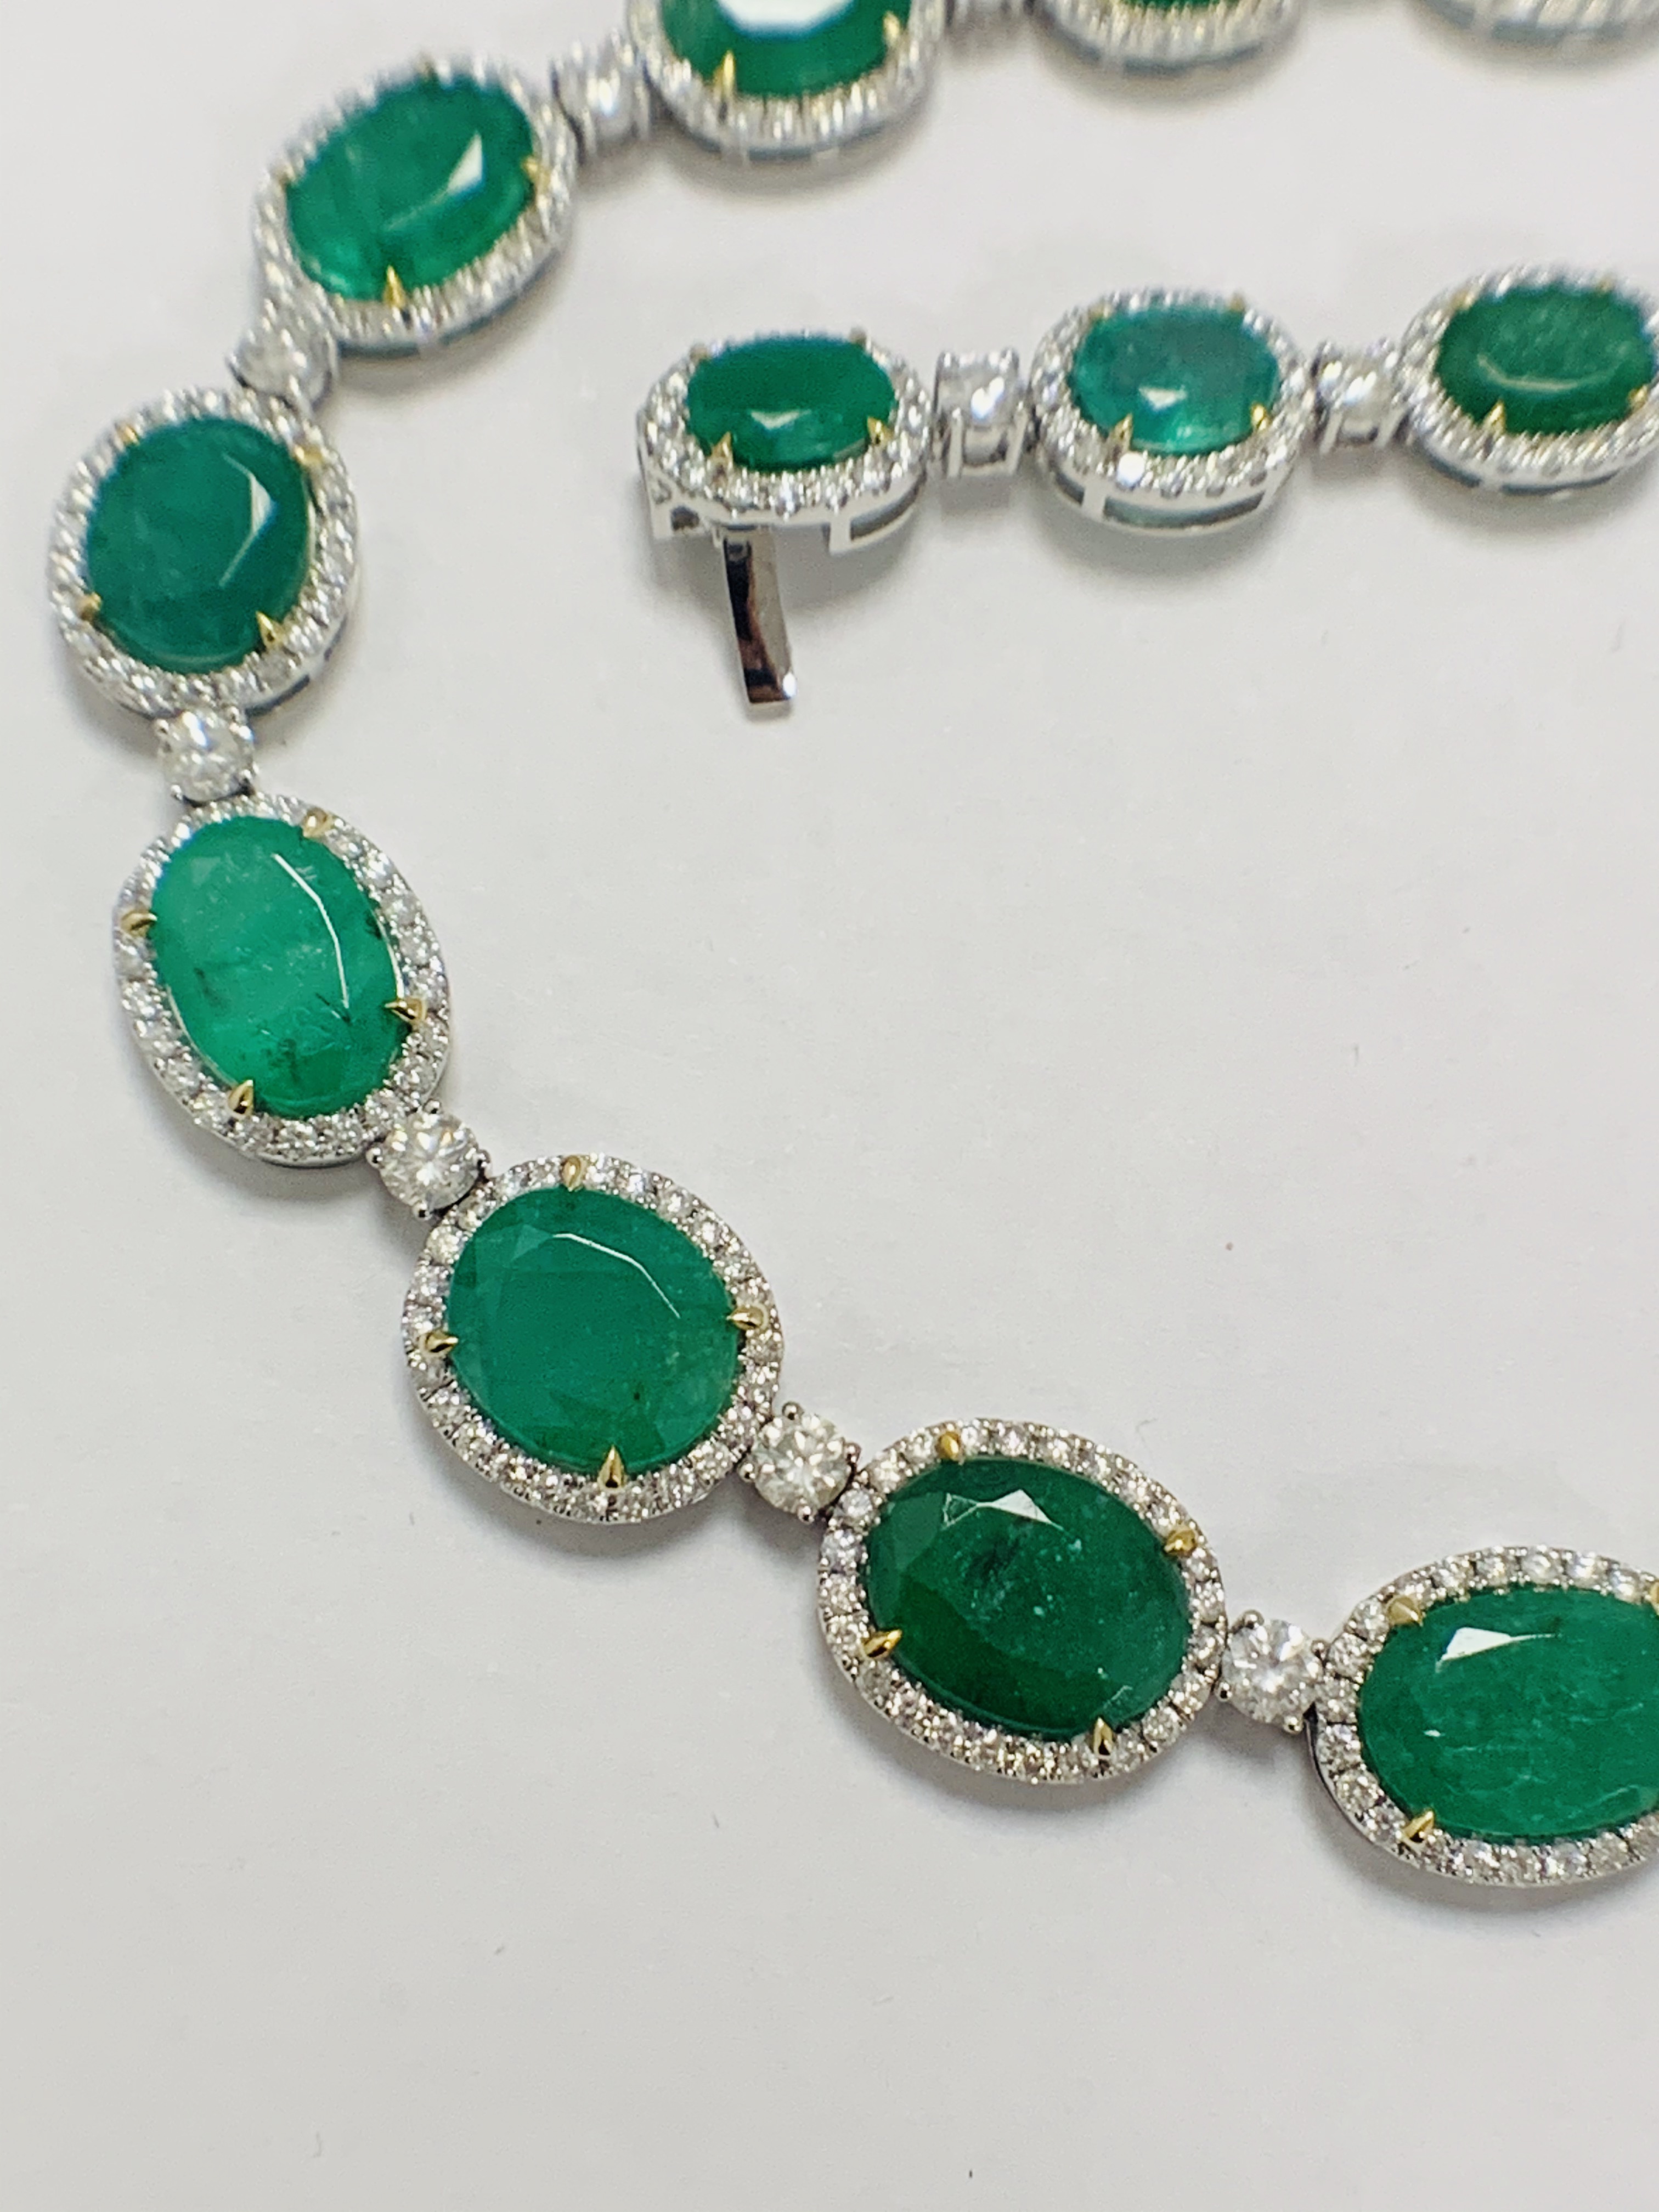 Platinum and Yellow Gold Emerald and Diamond necklace featuring, 29 oval cut, light to deep green Em - Image 10 of 36